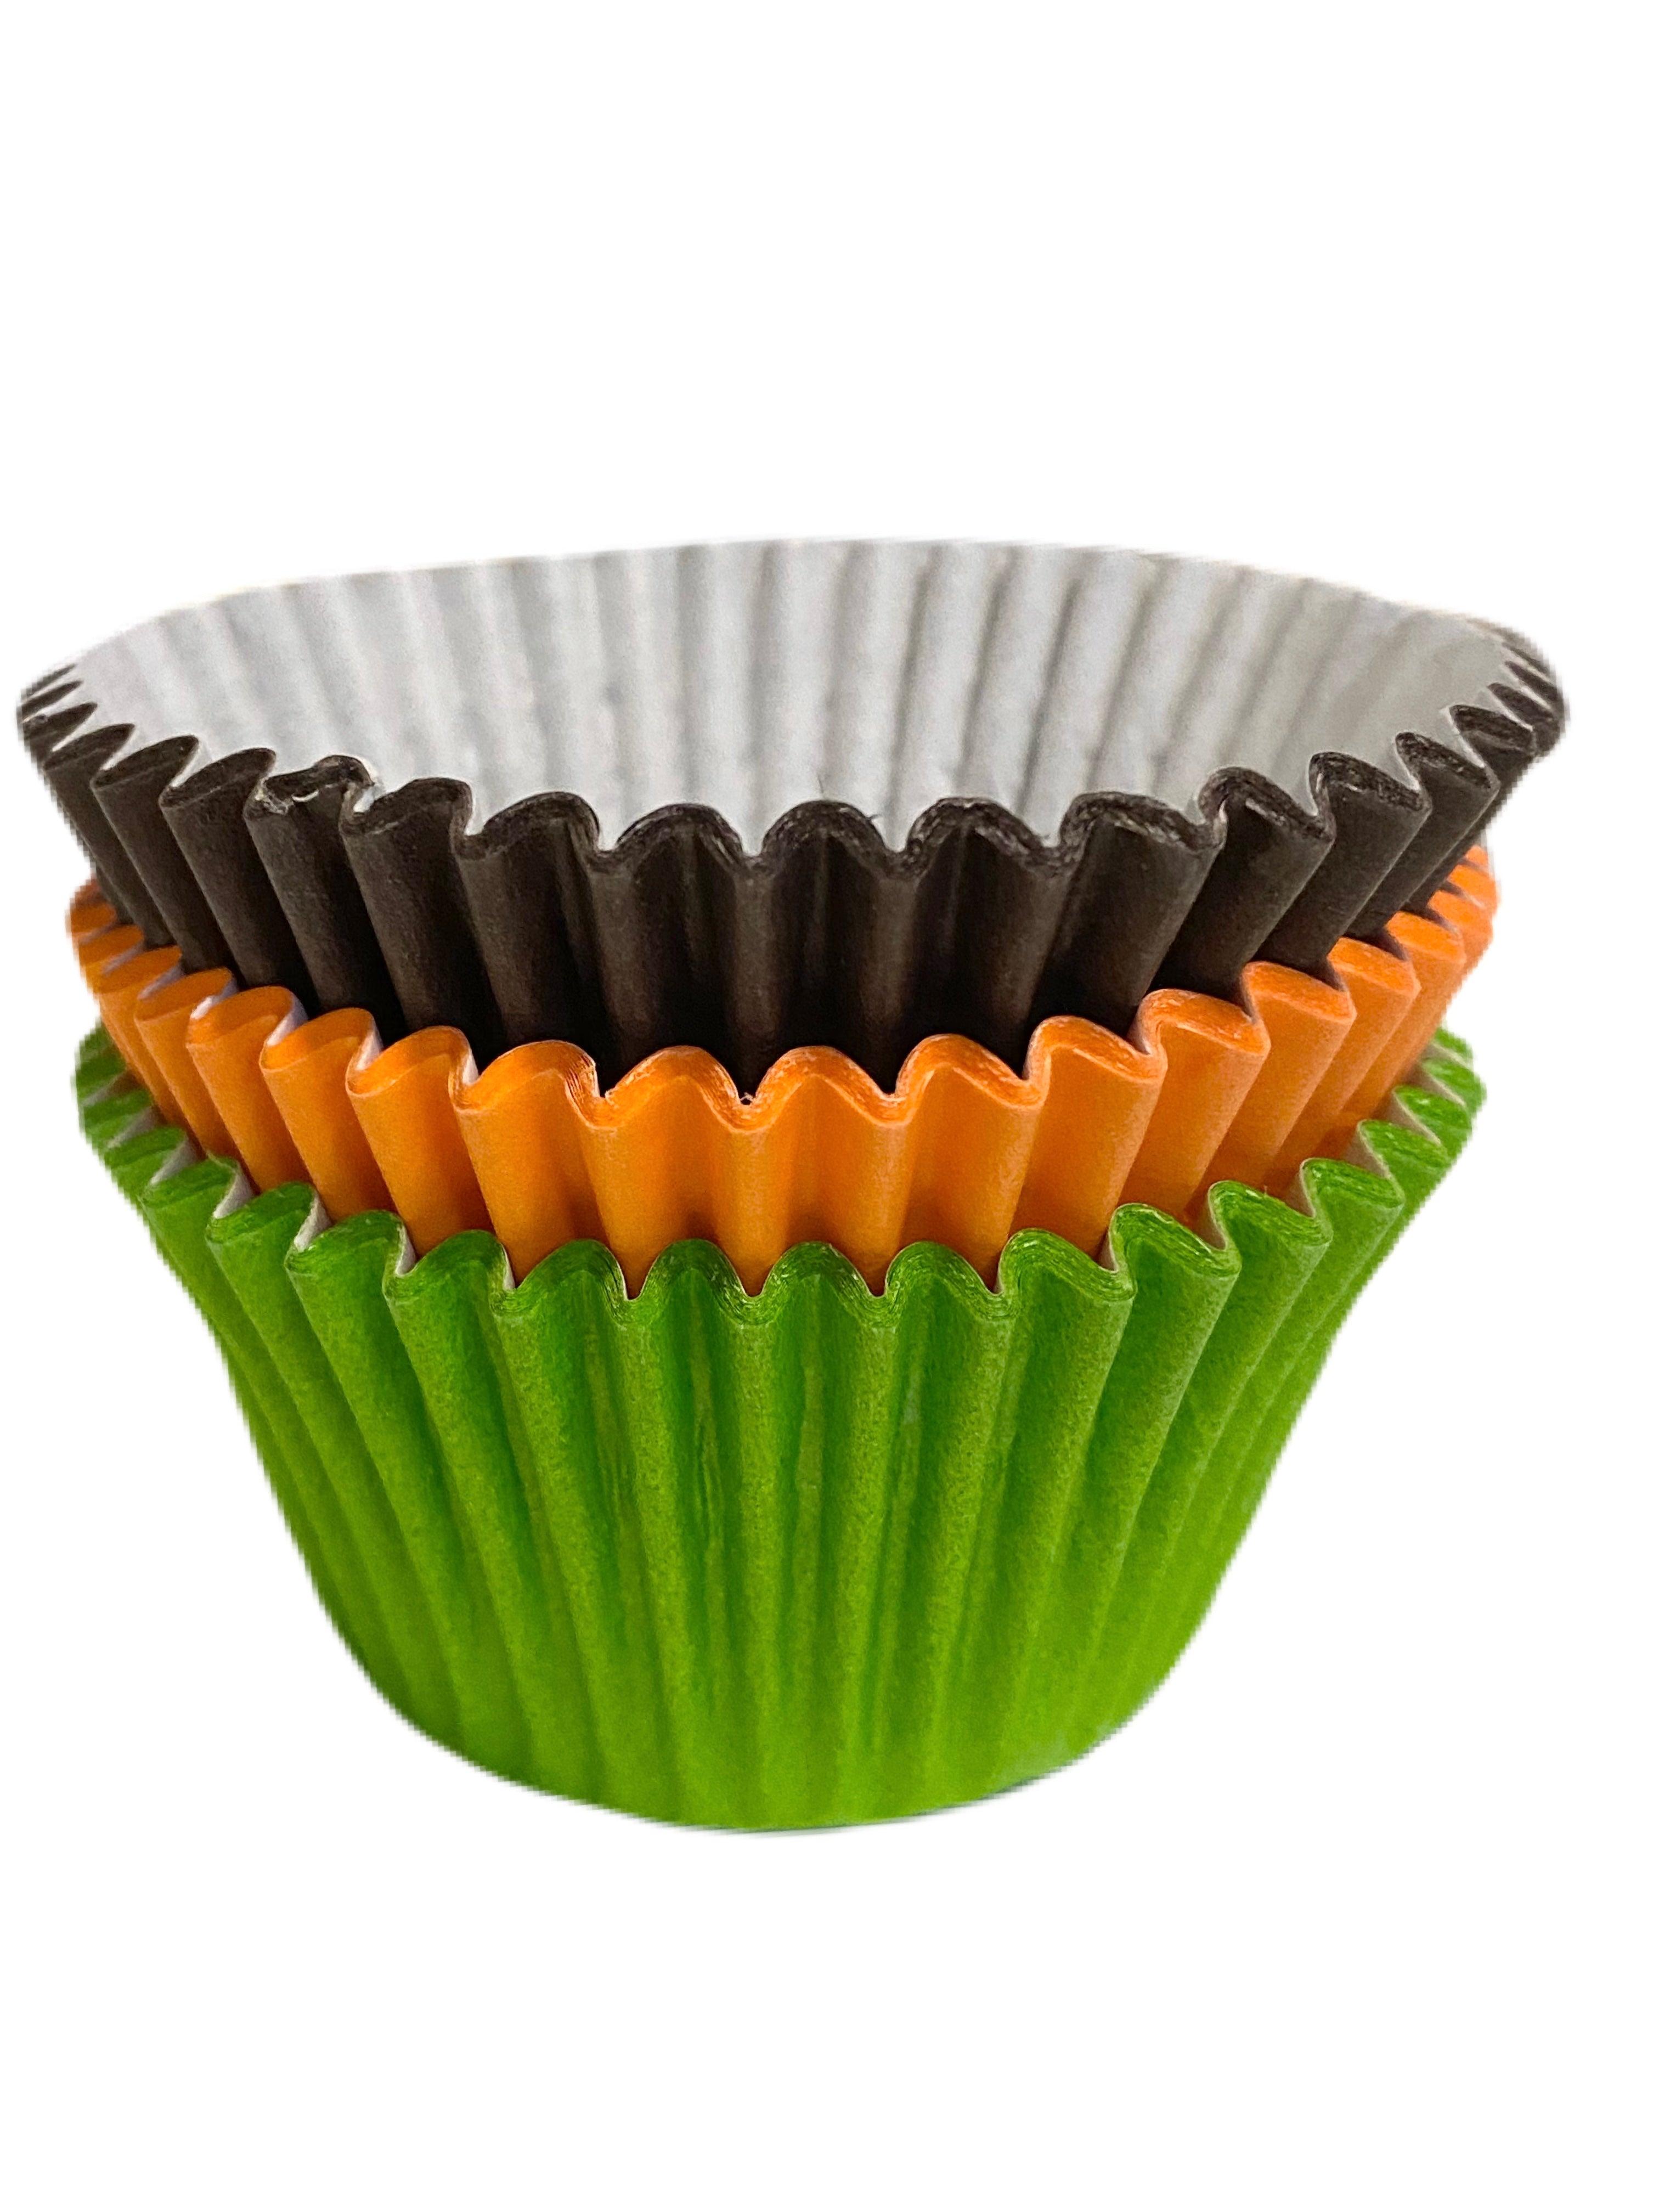 Paper Cupcake Baking Cases - pack of Approx 36 - Jungle / Dinosaur Mix (Brown, Orange, Lime) - The Cooks Cupboard Ltd